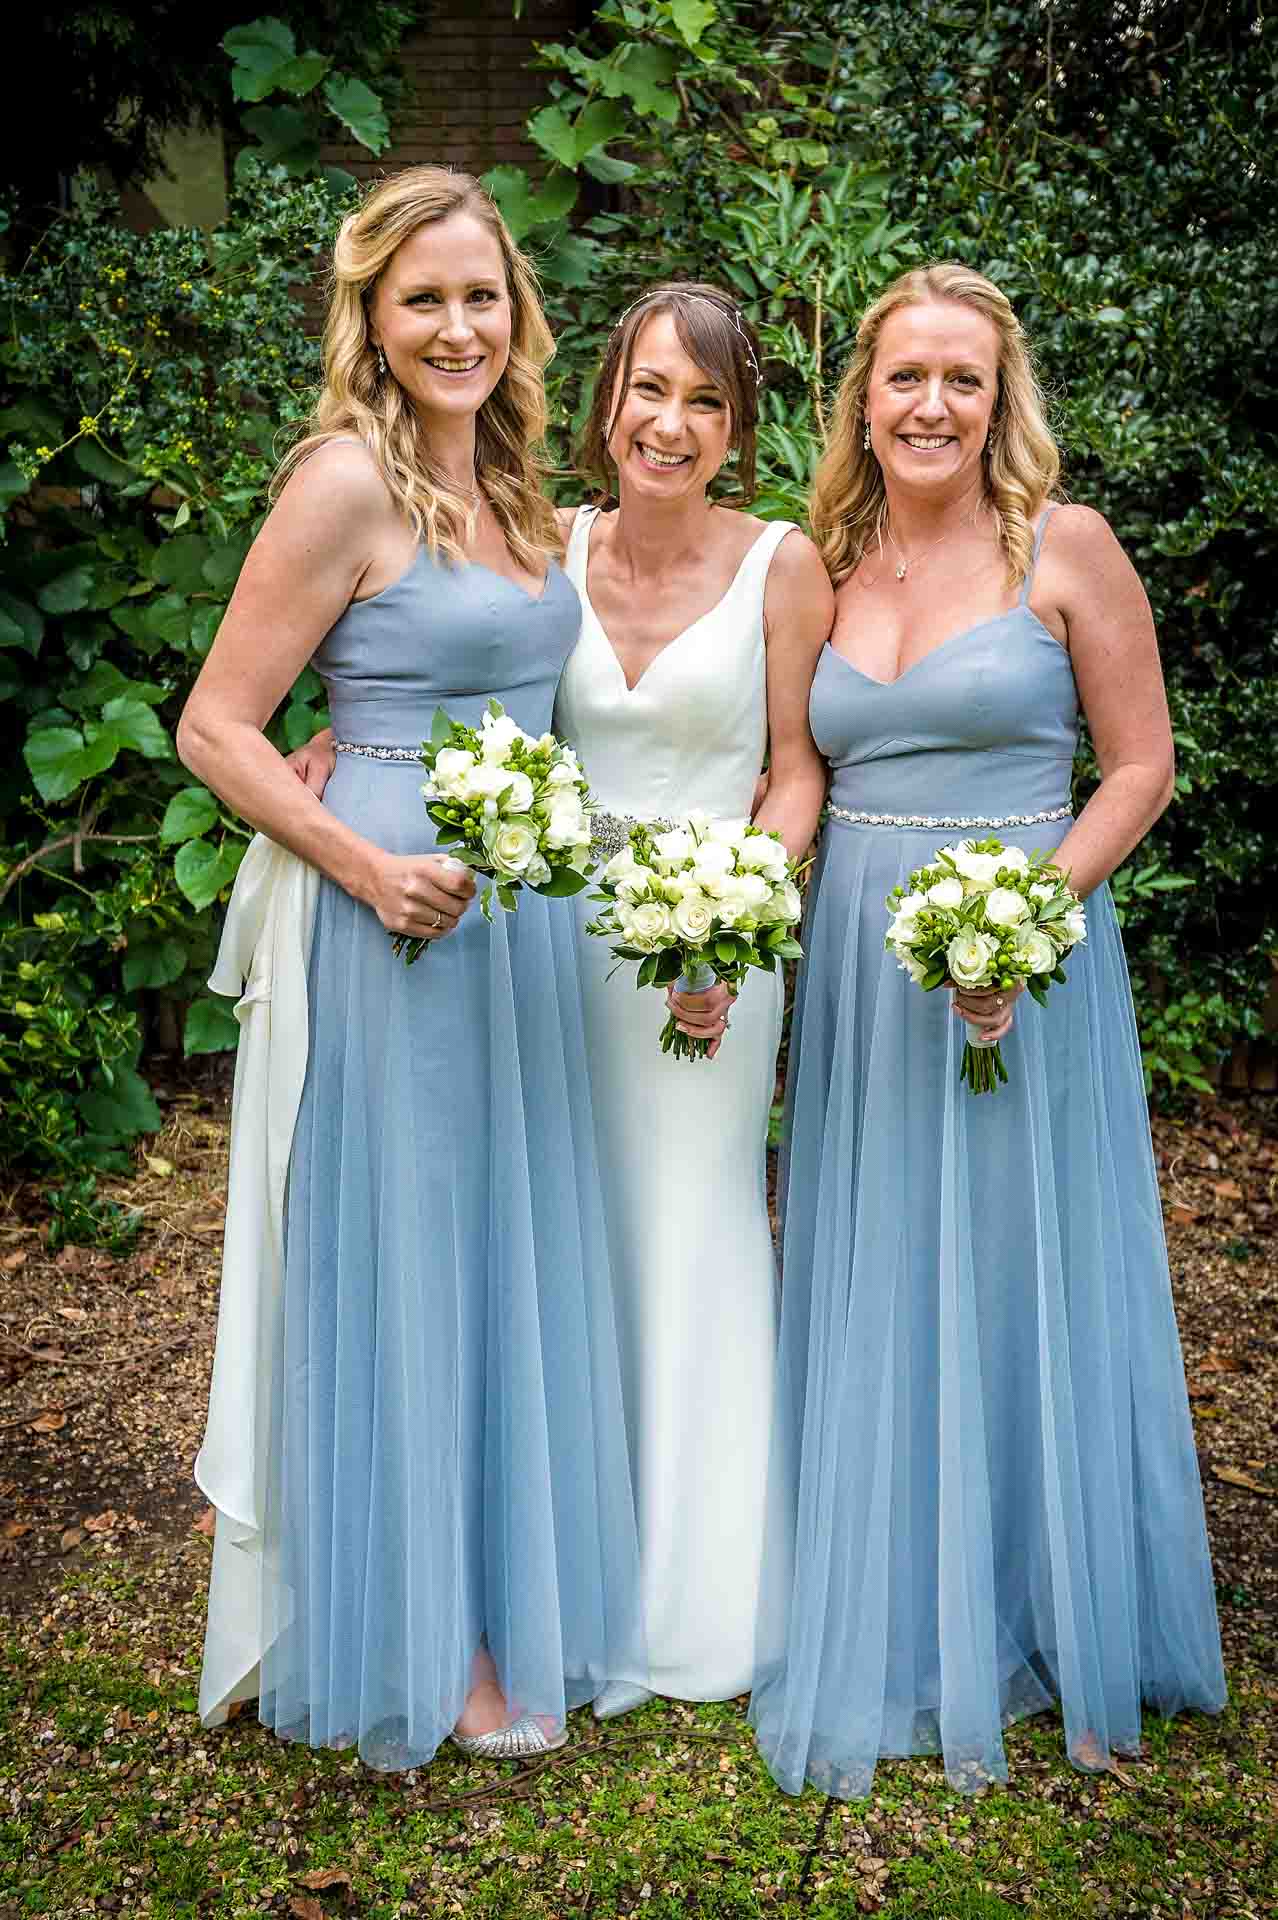 Formal Portrait of Bride with Friends at Wedding